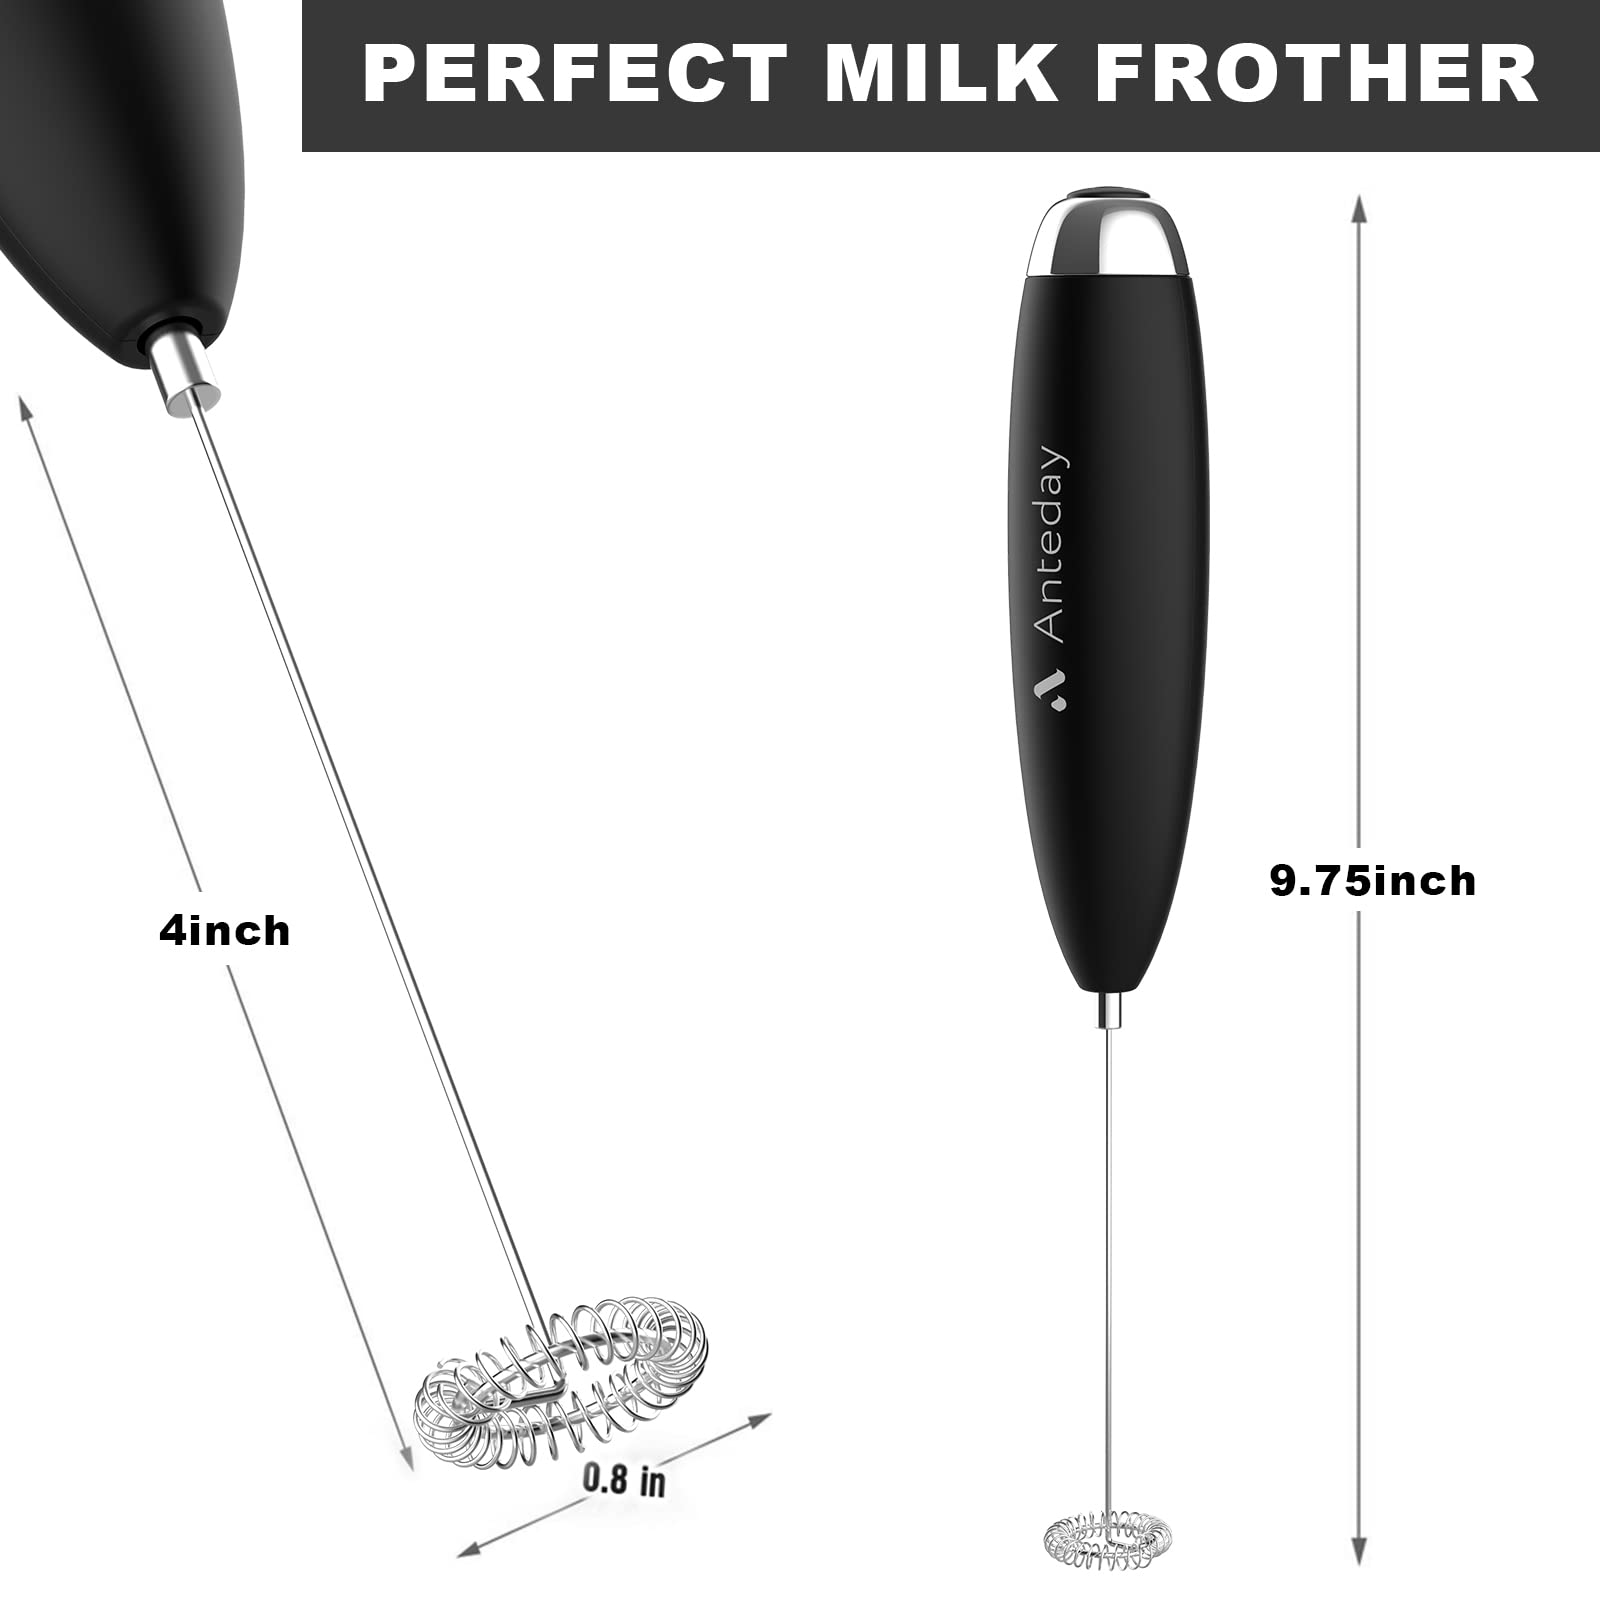 Milk Frother, Hand Mixer, Frother for Coffee, Anteday Battery Operated (Not Included) Electric Mini Matcha Whisk Hand Coffee Frother Electric Drink Stirrer for Lattes, Cappuccino, Hot ChocolateHe